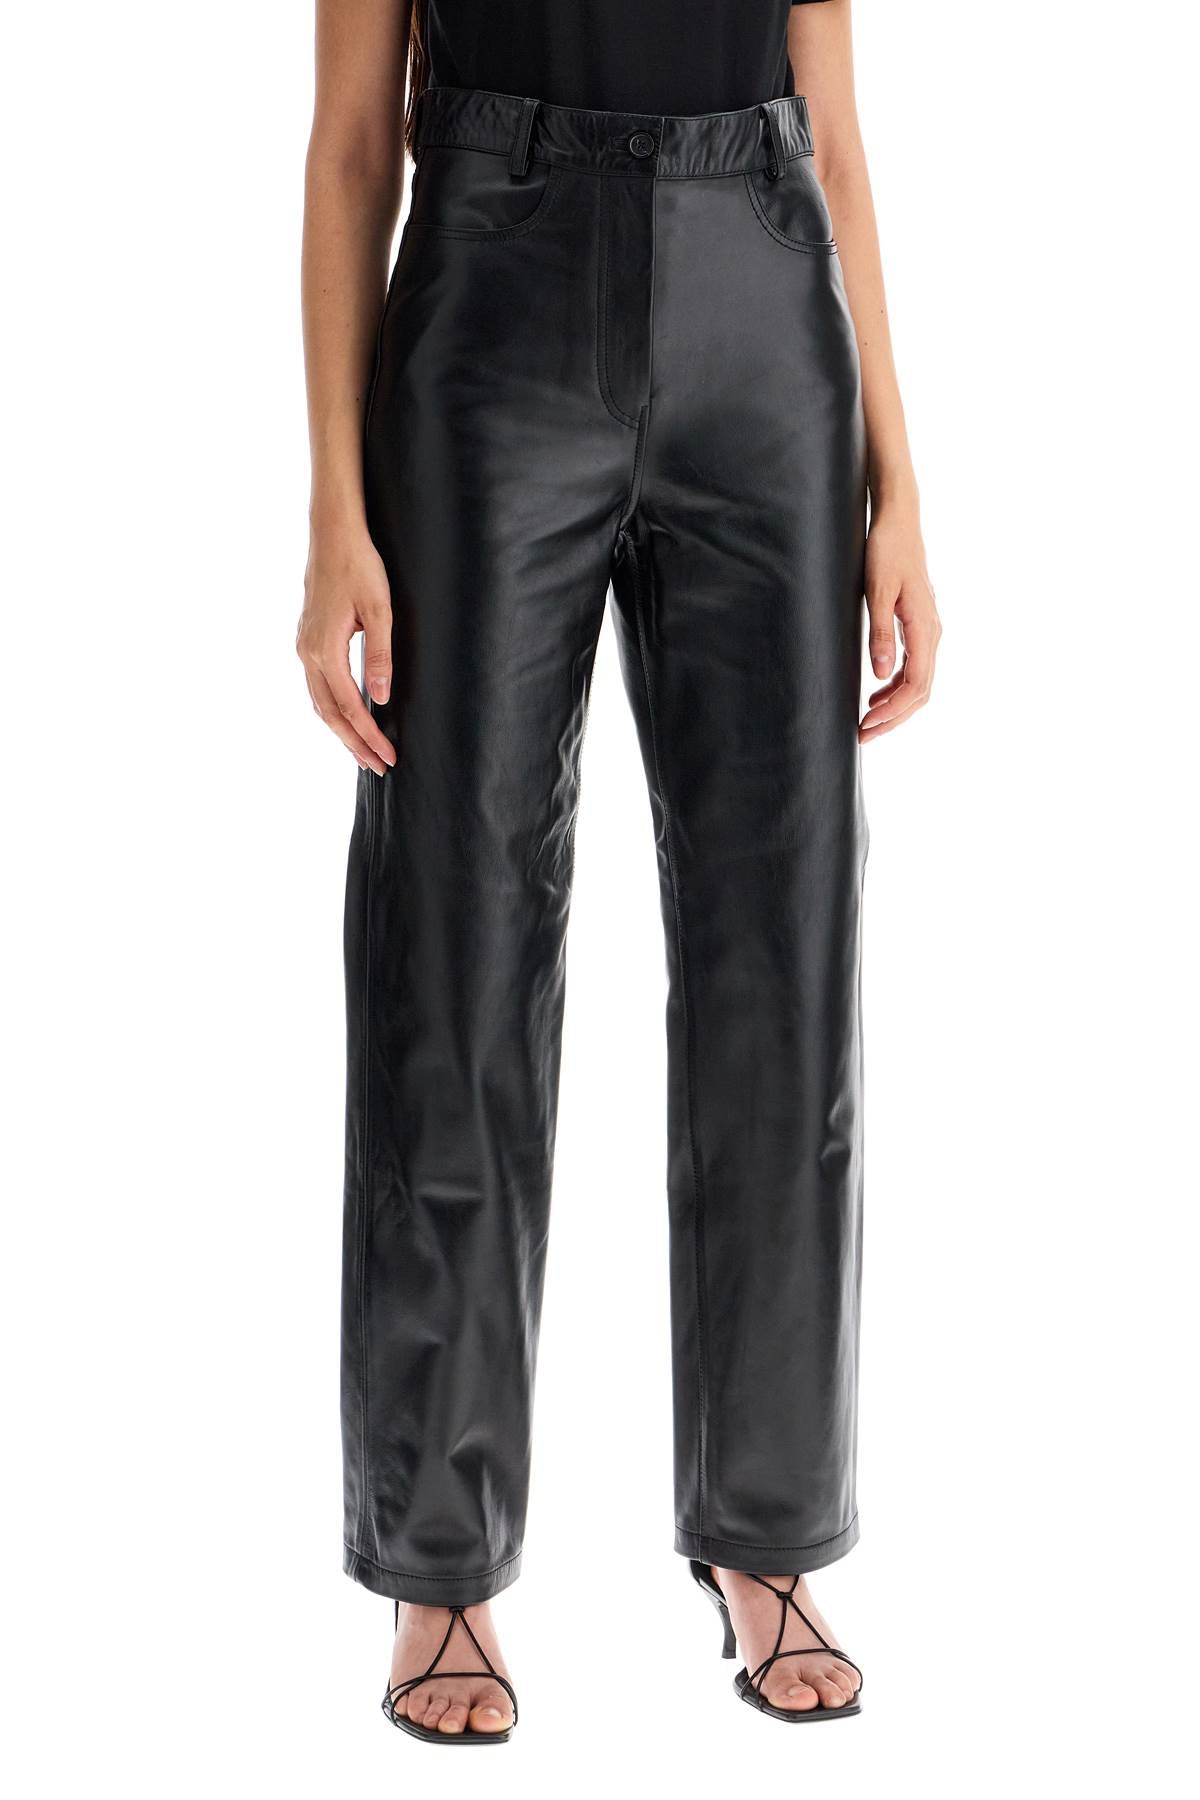 Straight Leather Pants For Men